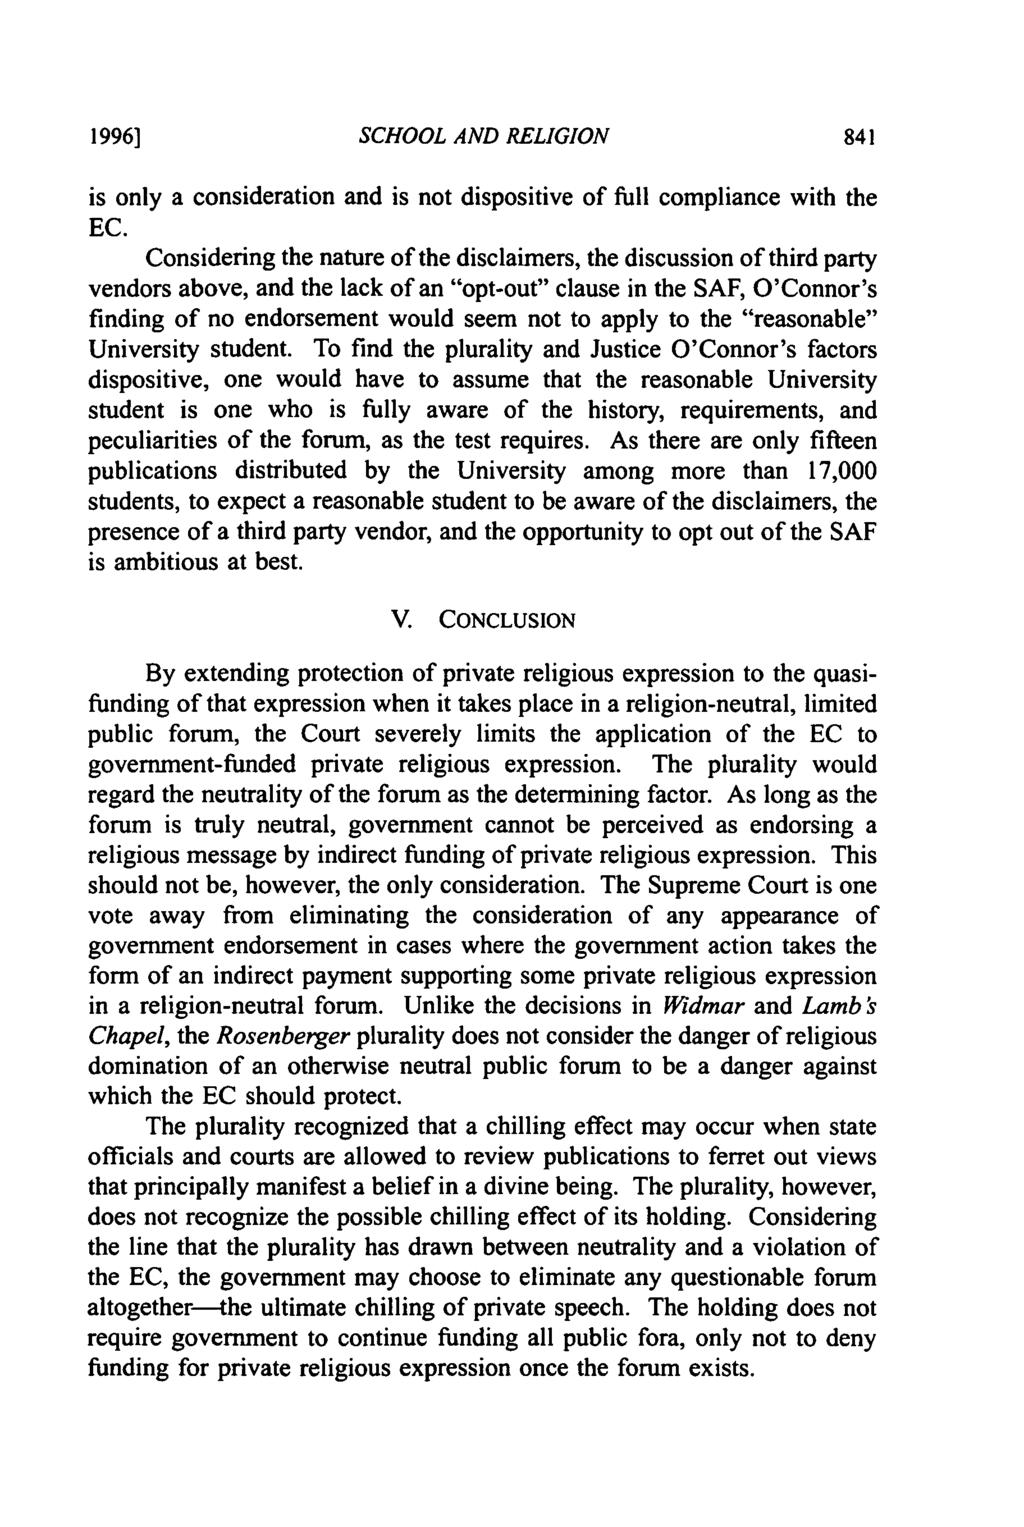 19961 SCHOOL AND RELIGION is only a consideration and is not dispositive of full compliance with the EC.